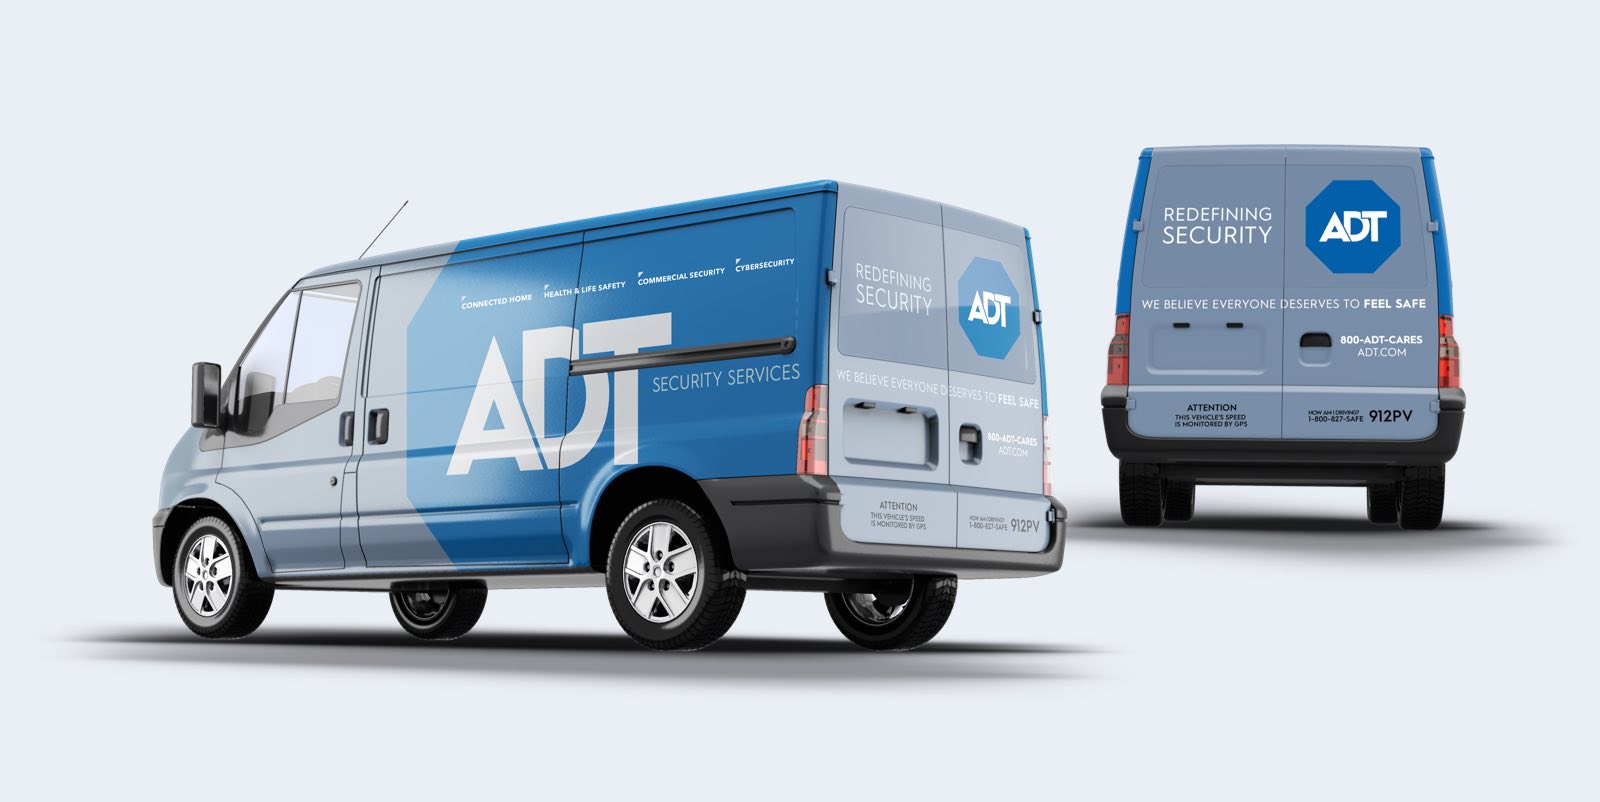 Two views of an ADT van with redesigned fleet graphics